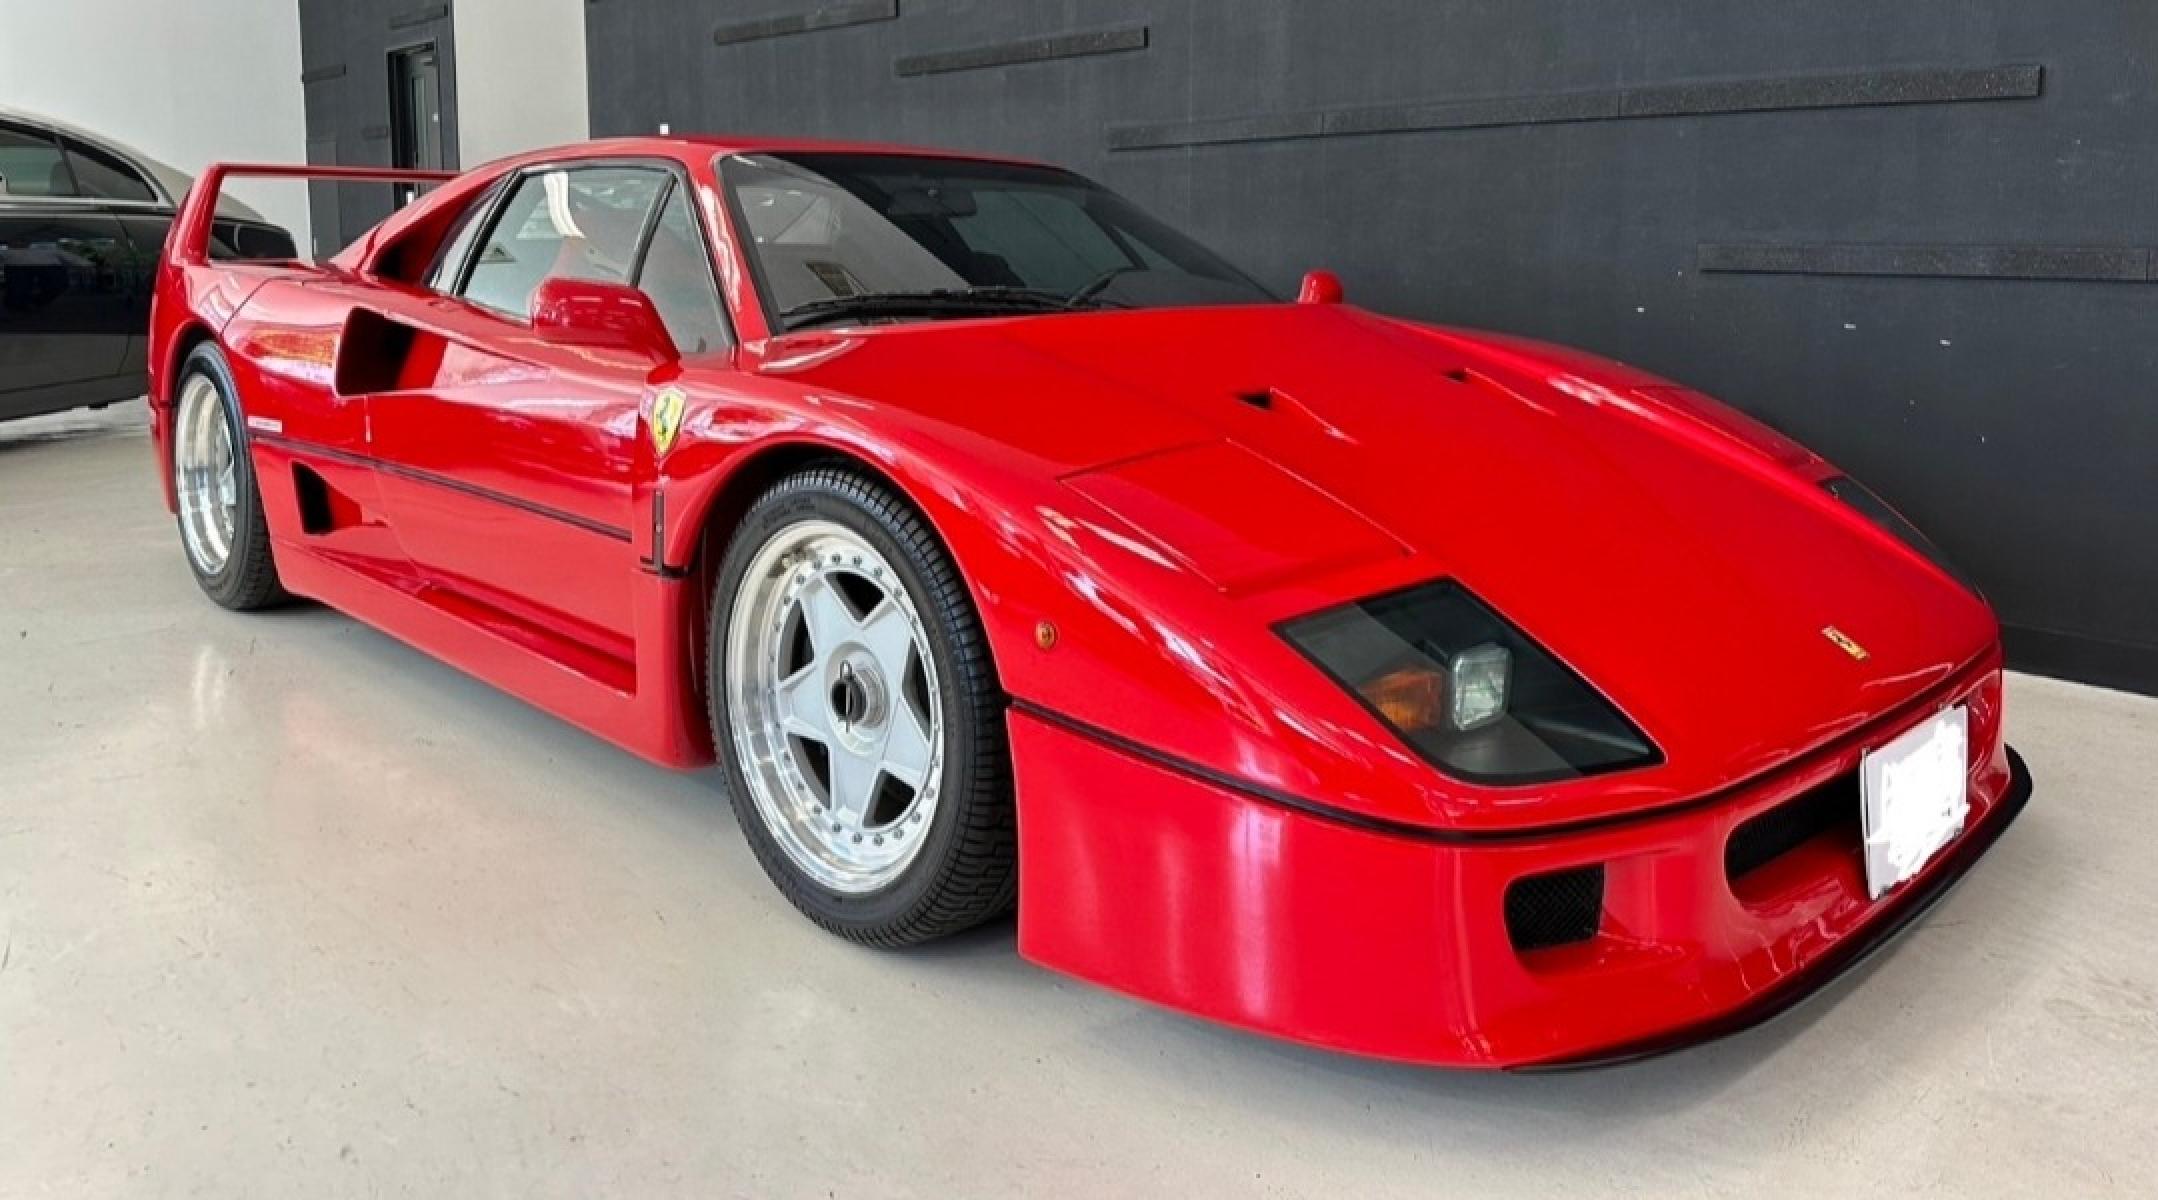 1990 Red Ferrari F40 , 0.000000, 0.000000 - 1990 Ferrari F40 1990 delivered as new in France 1992 delivered to 2nd owner in Japan from France. 2003 current owner All service record from present owner All repaint for refresh perfect skill Exchanged new cutch and master last month, was reupholstered both of the seat new fabric and spong - Photo #2